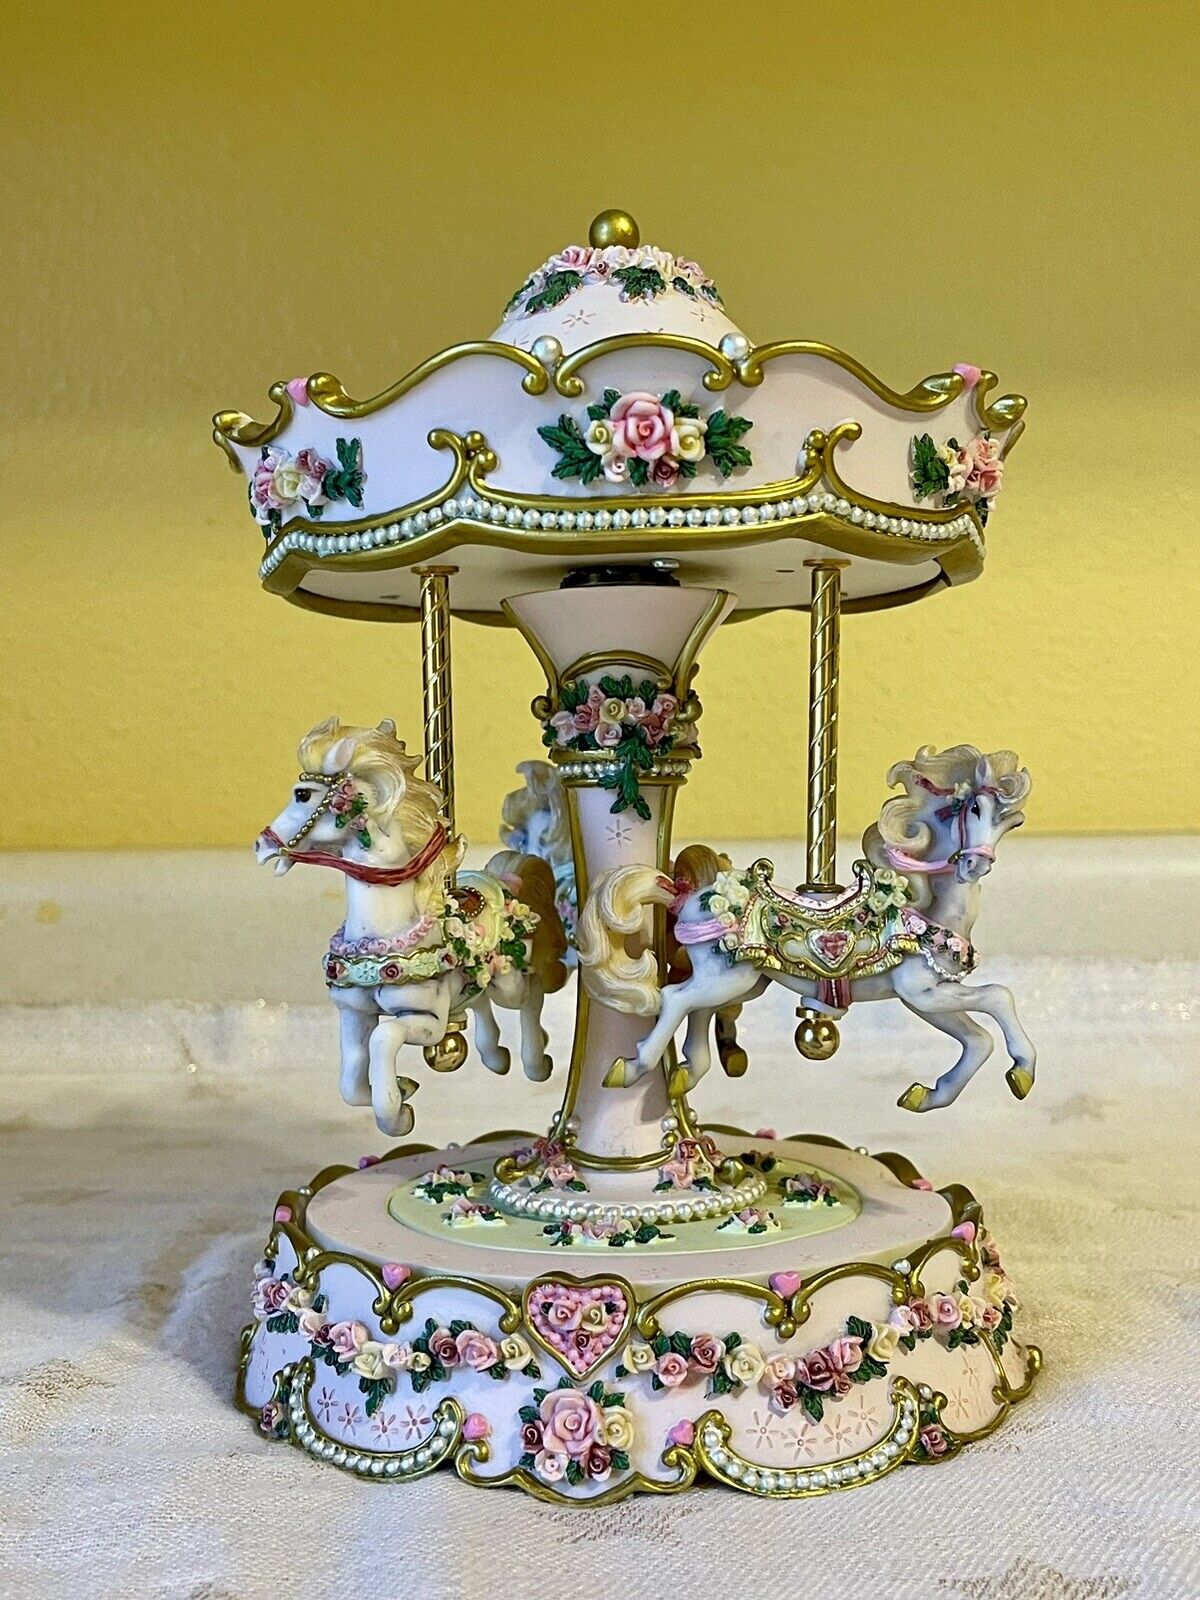 Hearts and Roses 3 Horses Carousel by San Fransisco Music Box Company